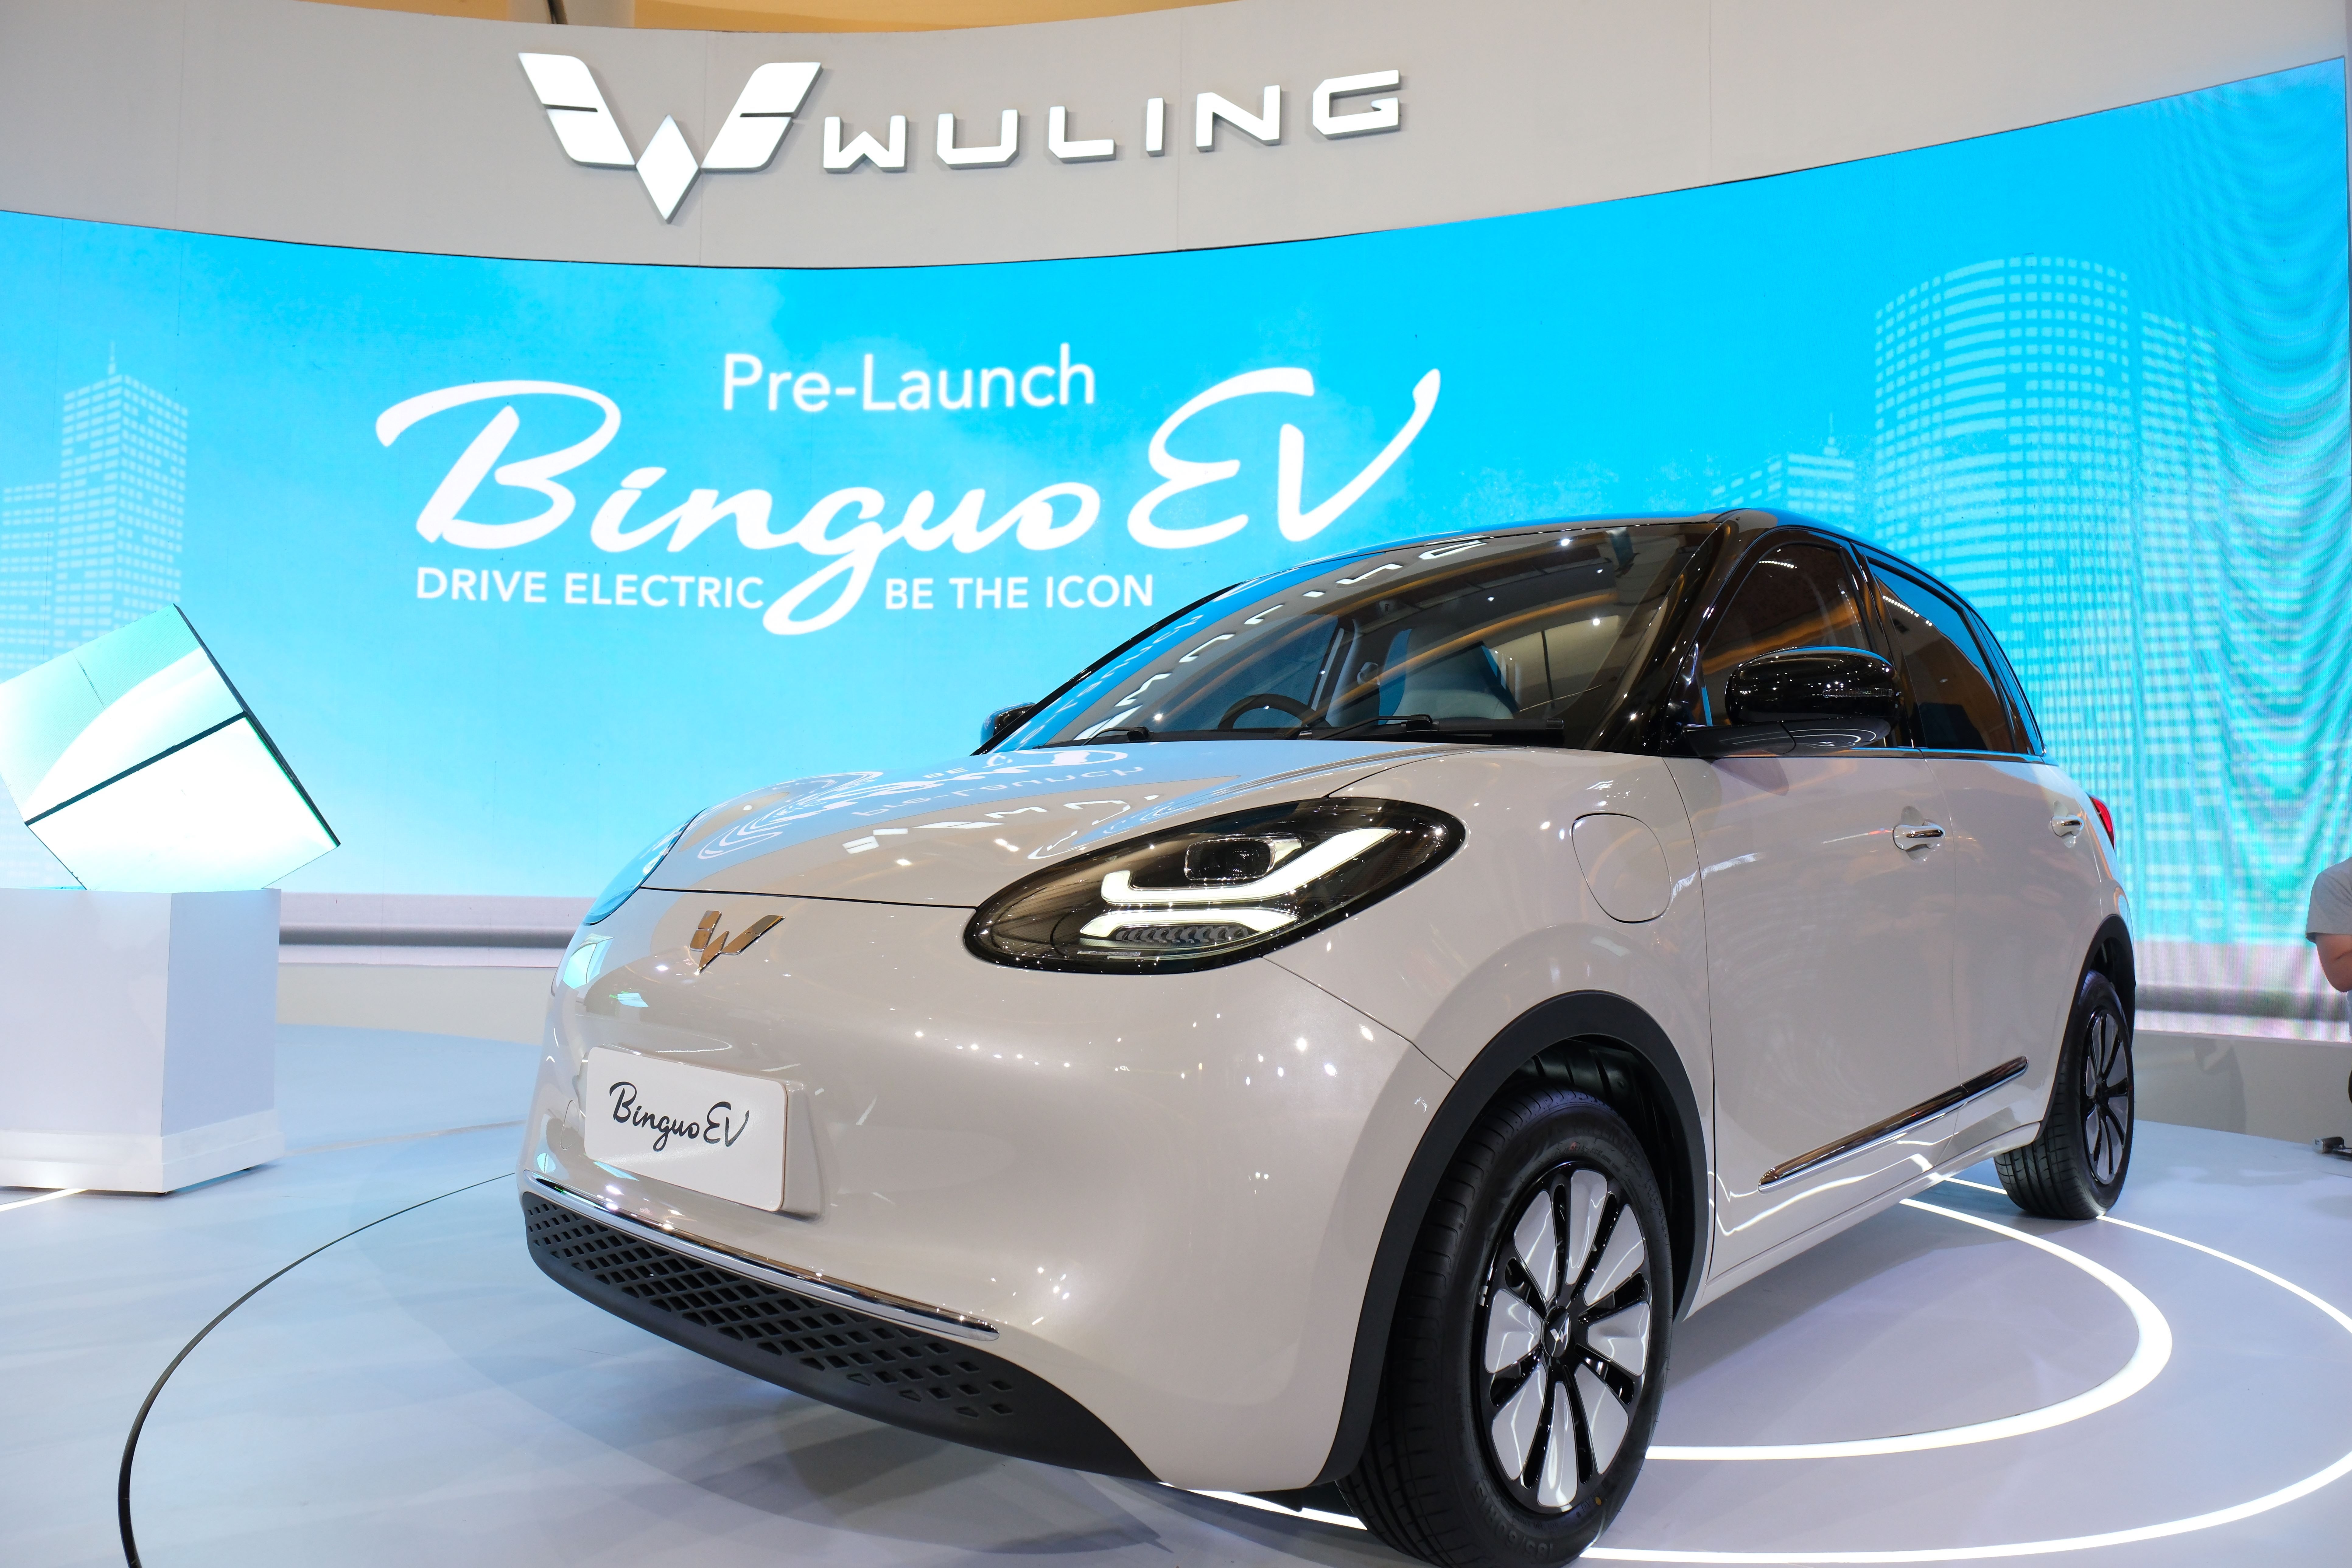 Image Within Seven Days, Wuling BinguoEV Bookings Have Reached More than 1,000 SPKs